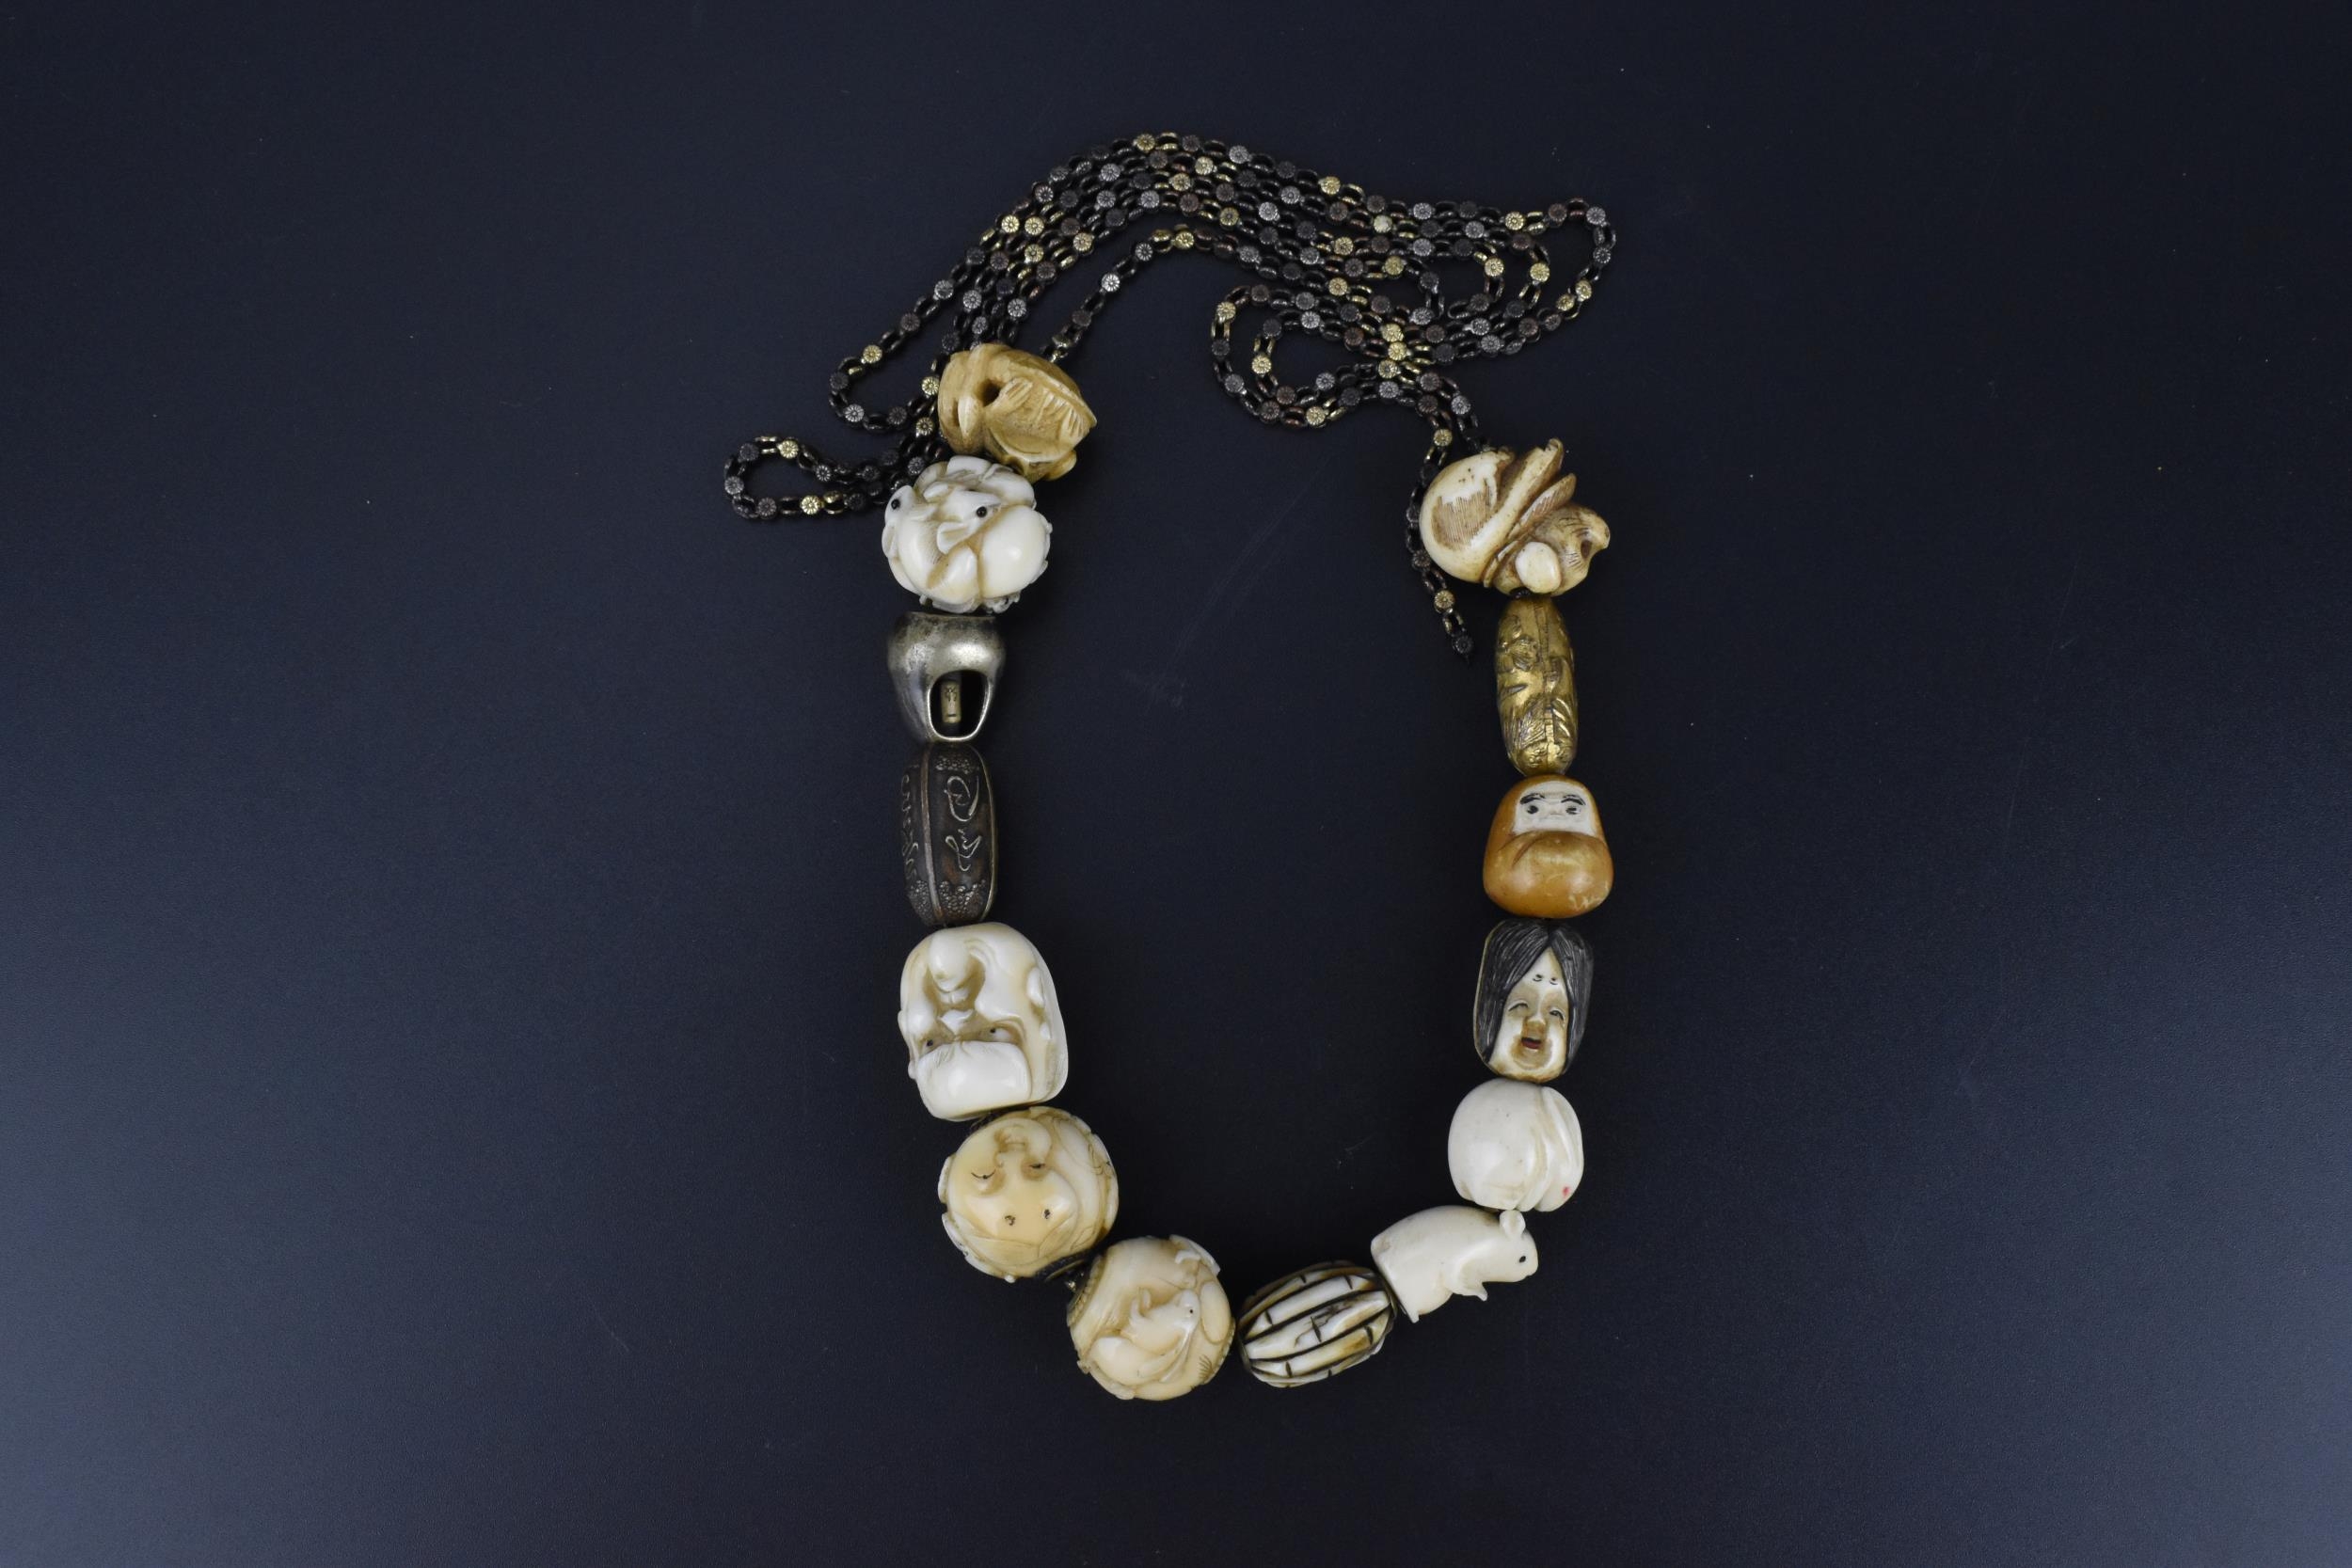 A 19th century Japanese ojime bead necklace, with carved ivory, bone, and metal ojimes, modelled - Bild 2 aus 7